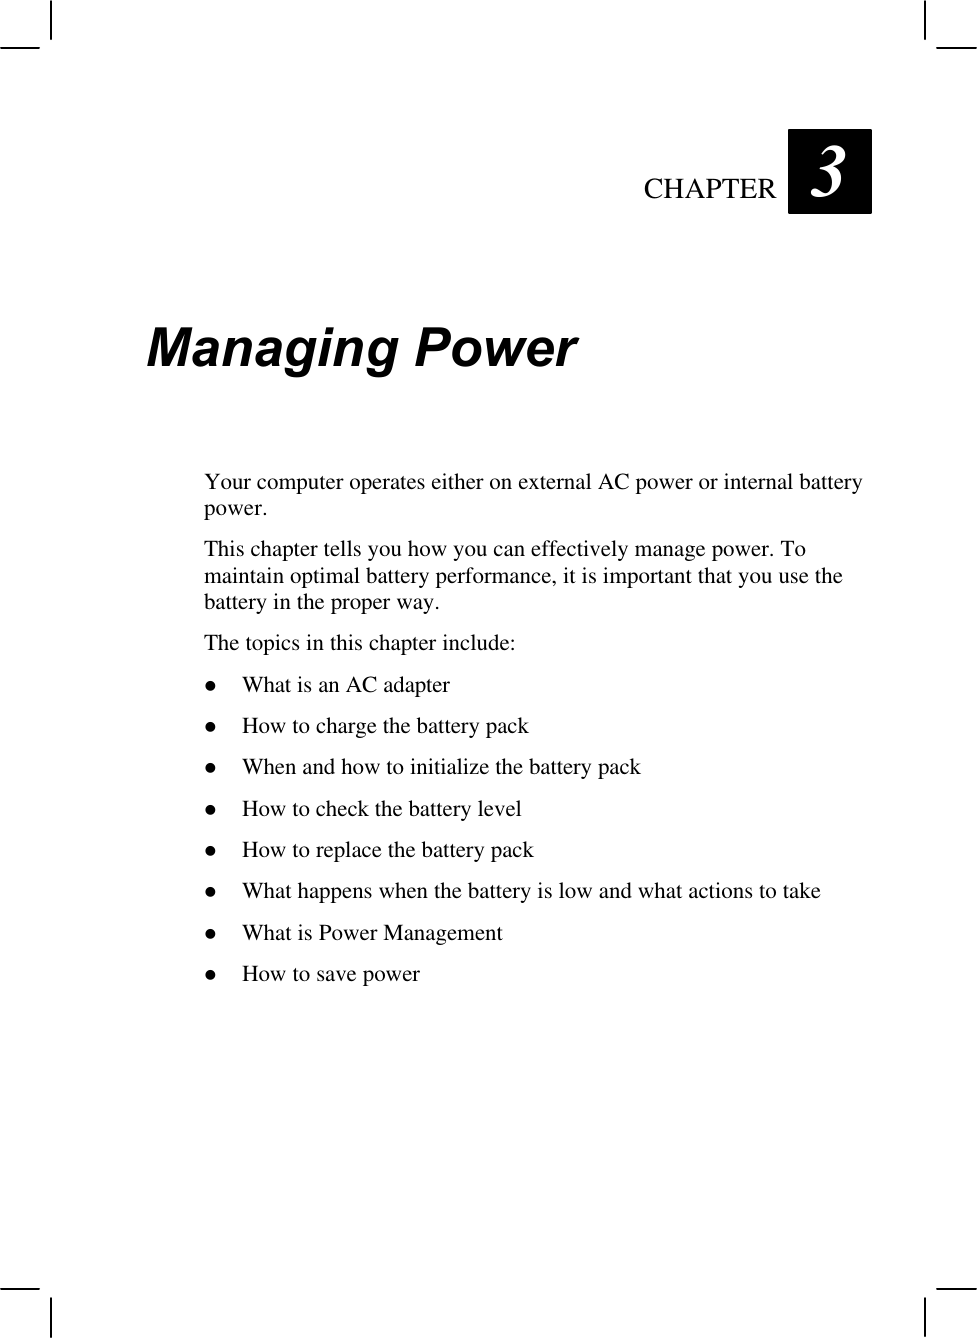 CHAPTER  3Managing PowerYour computer operates either on external AC power or internal batterypower.This chapter tells you how you can effectively manage power. Tomaintain optimal battery performance, it is important that you use thebattery in the proper way.The topics in this chapter include:l What is an AC adapterl How to charge the battery packl When and how to initialize the battery packl How to check the battery levell How to replace the battery packl What happens when the battery is low and what actions to takel What is Power Managementl How to save power